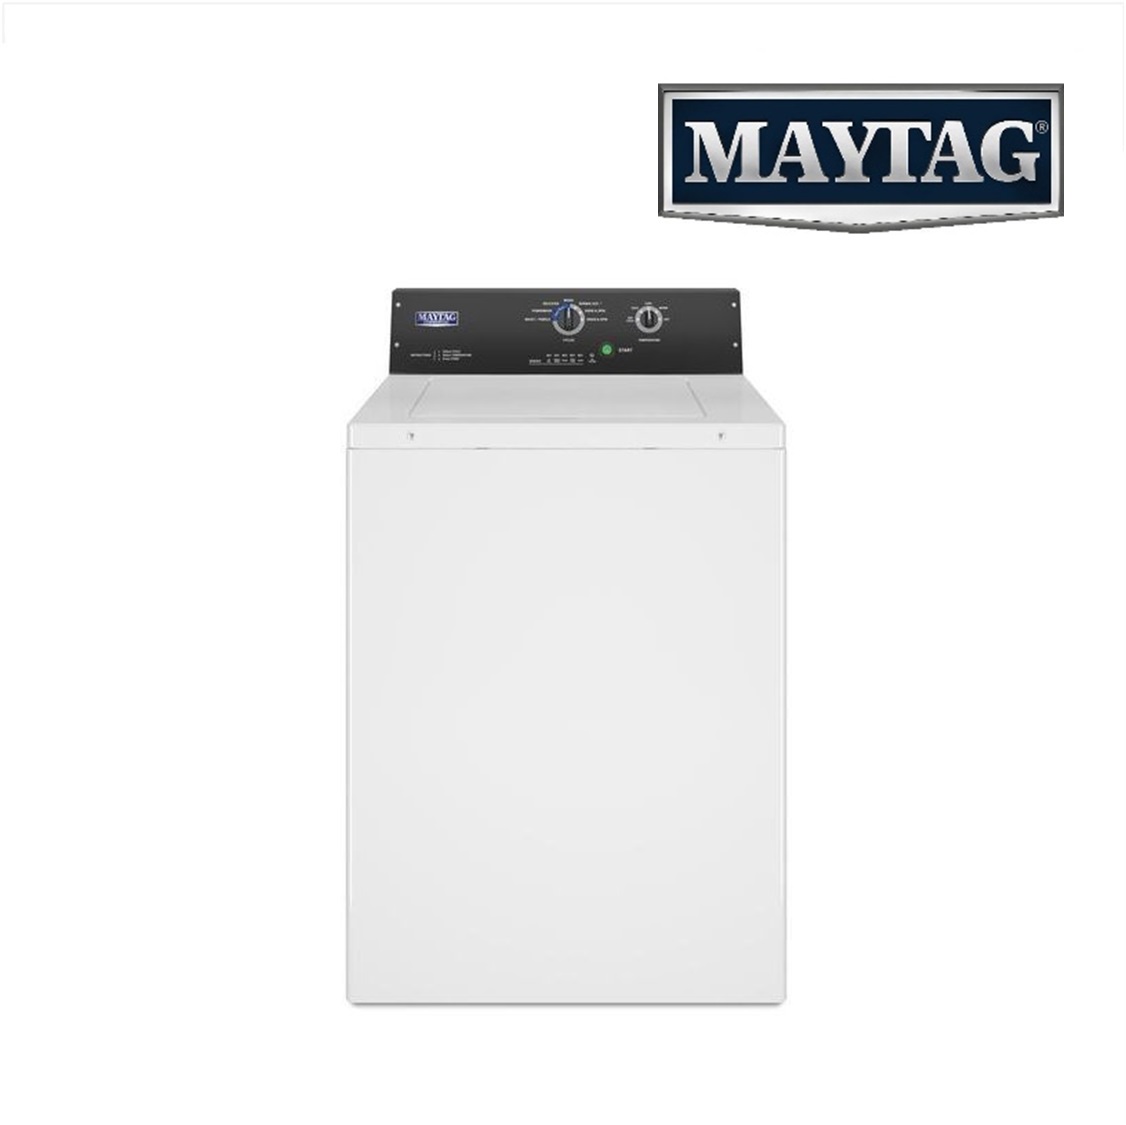 MAYTAG 15 kg IEC Standards Top Load Commercial Washer, Mechanical Control, Optimal Wash Performance MAT20MN